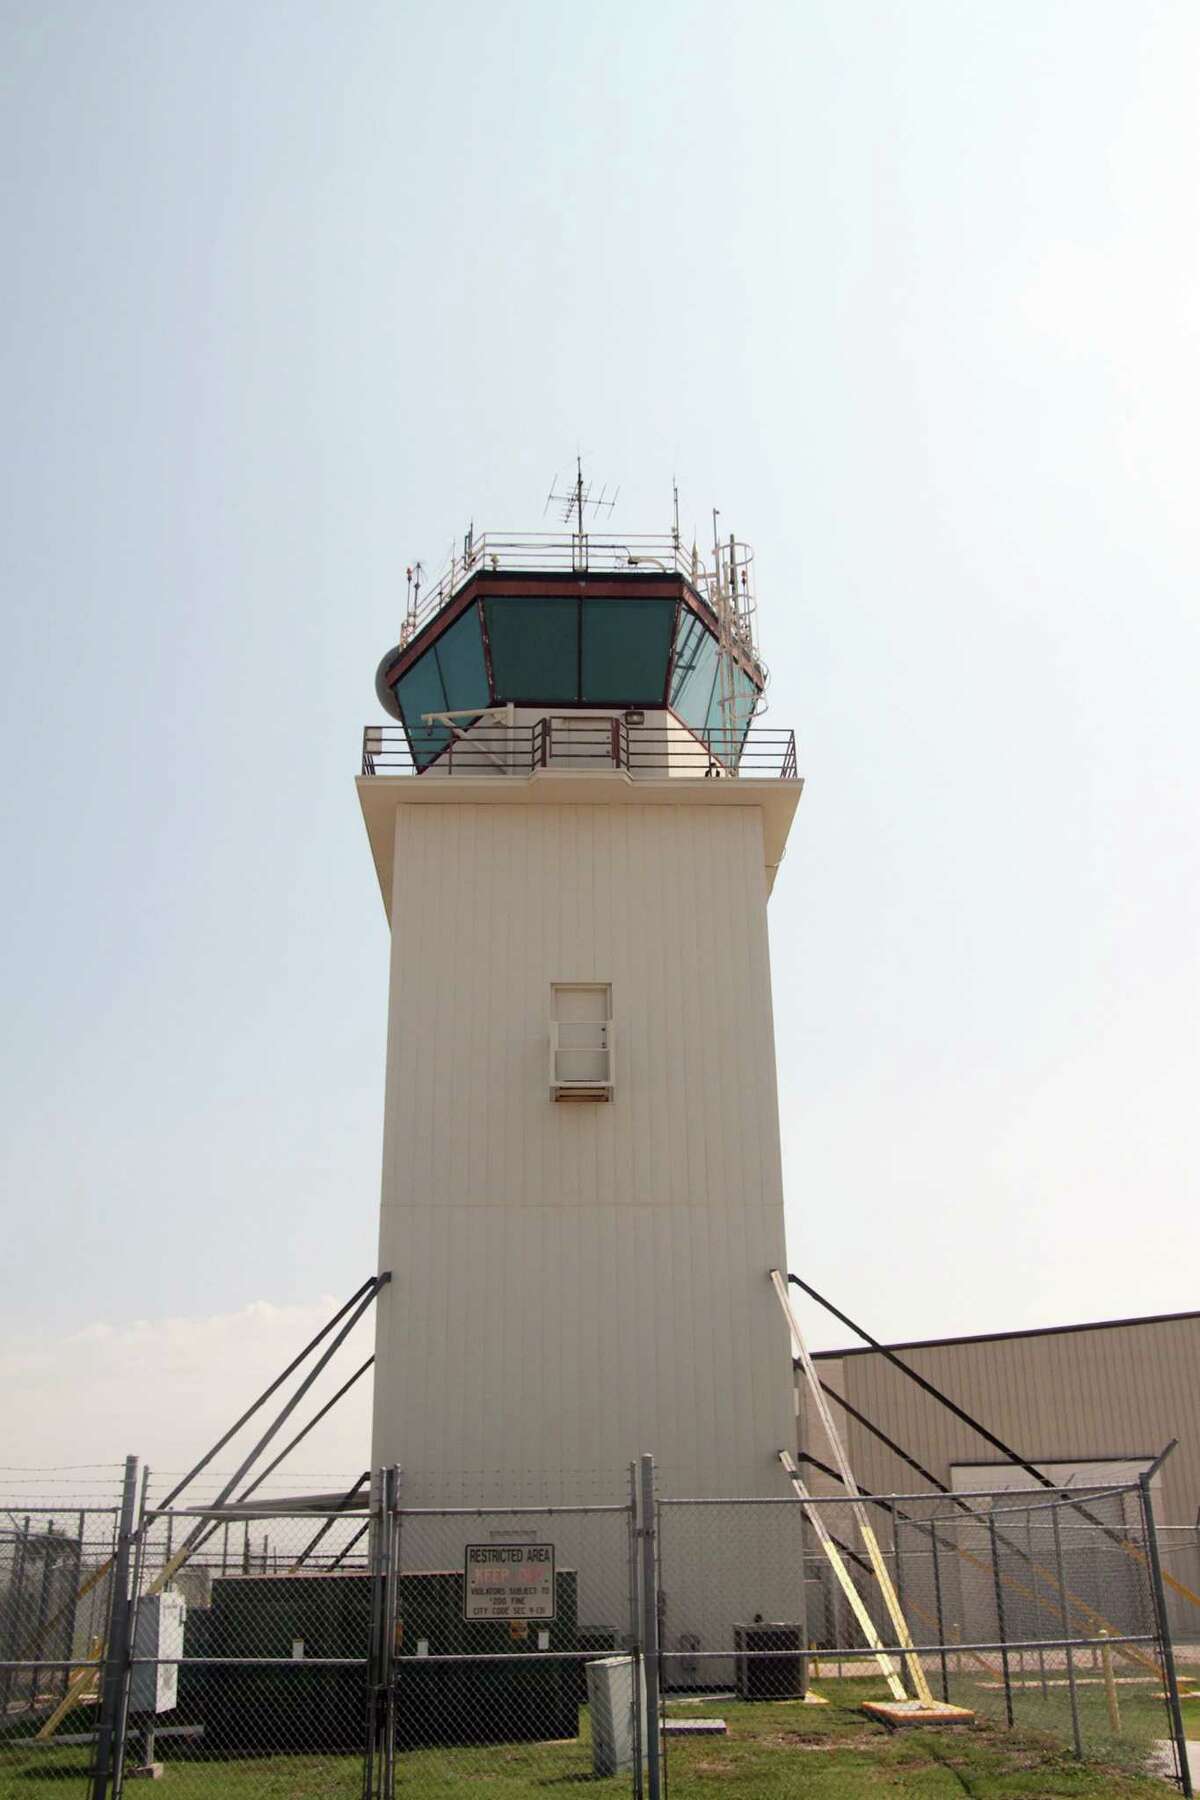 The original control tower at Ellington Field, still in operation, will be retired once the new one is built. Photo by Pin Lim.